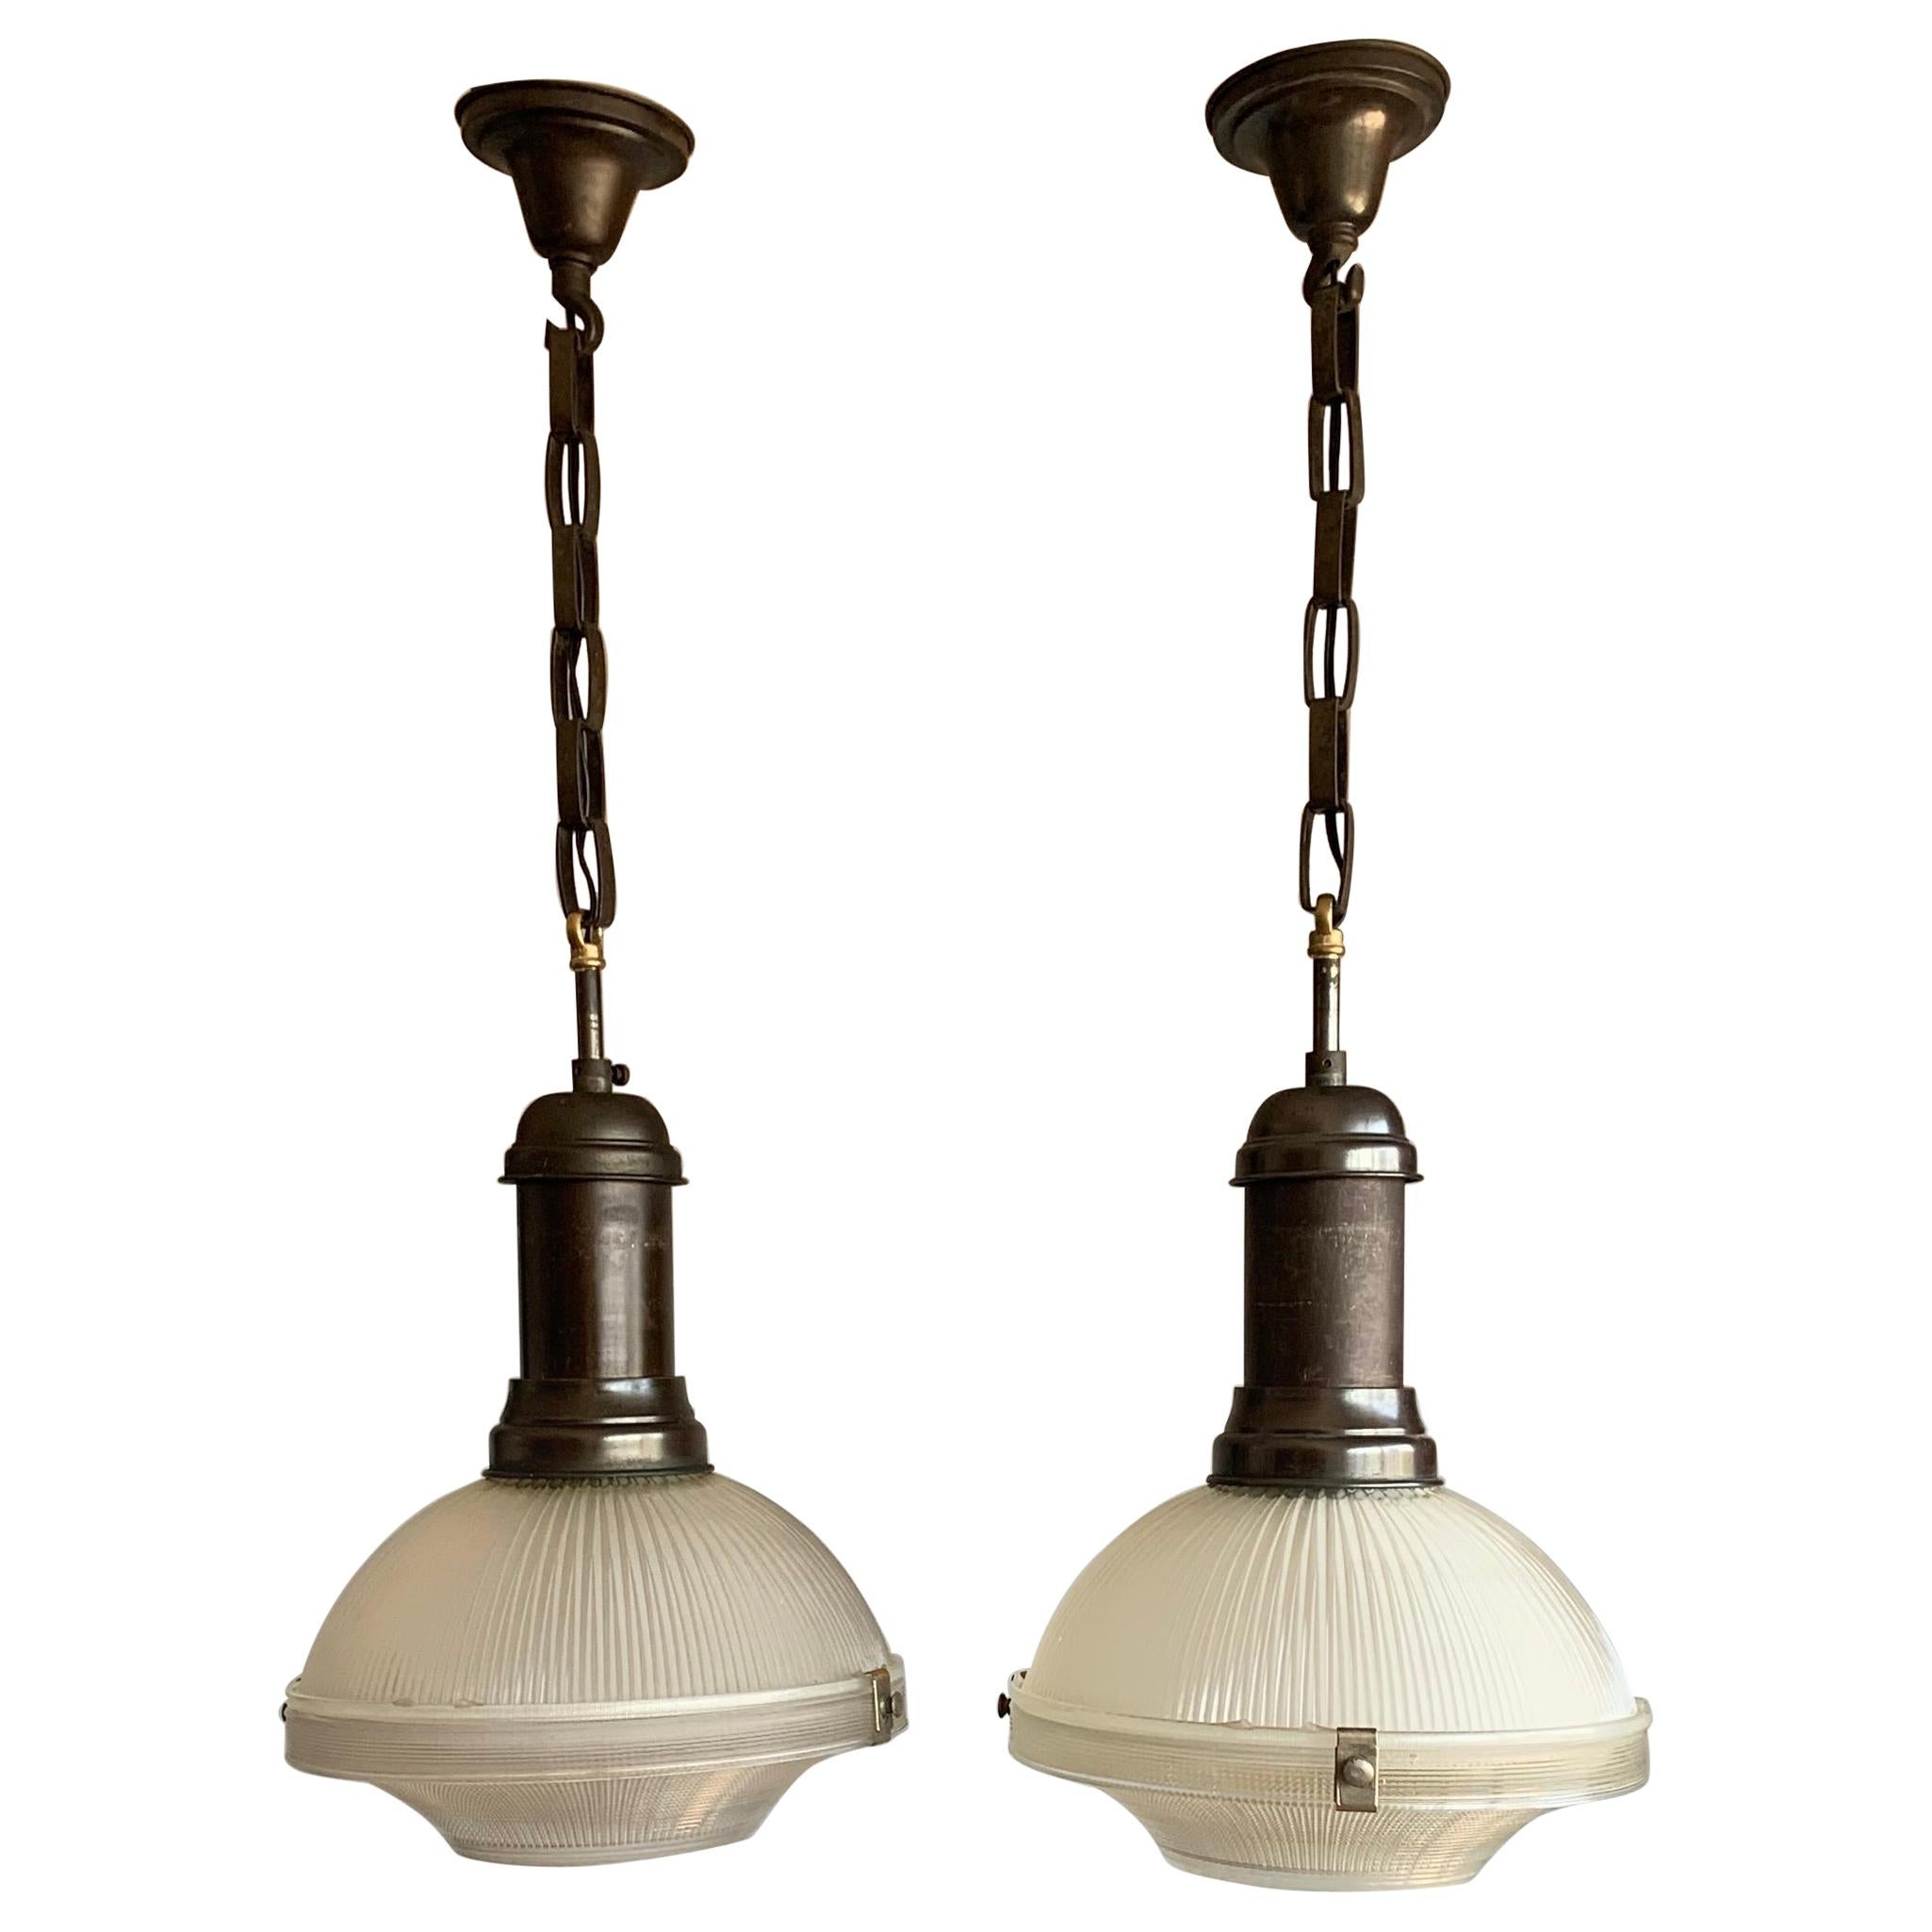 Pair Of Early 1900s French Arts And Crafts Holophane Brass And Glass Pendant Lights At 1stdibs